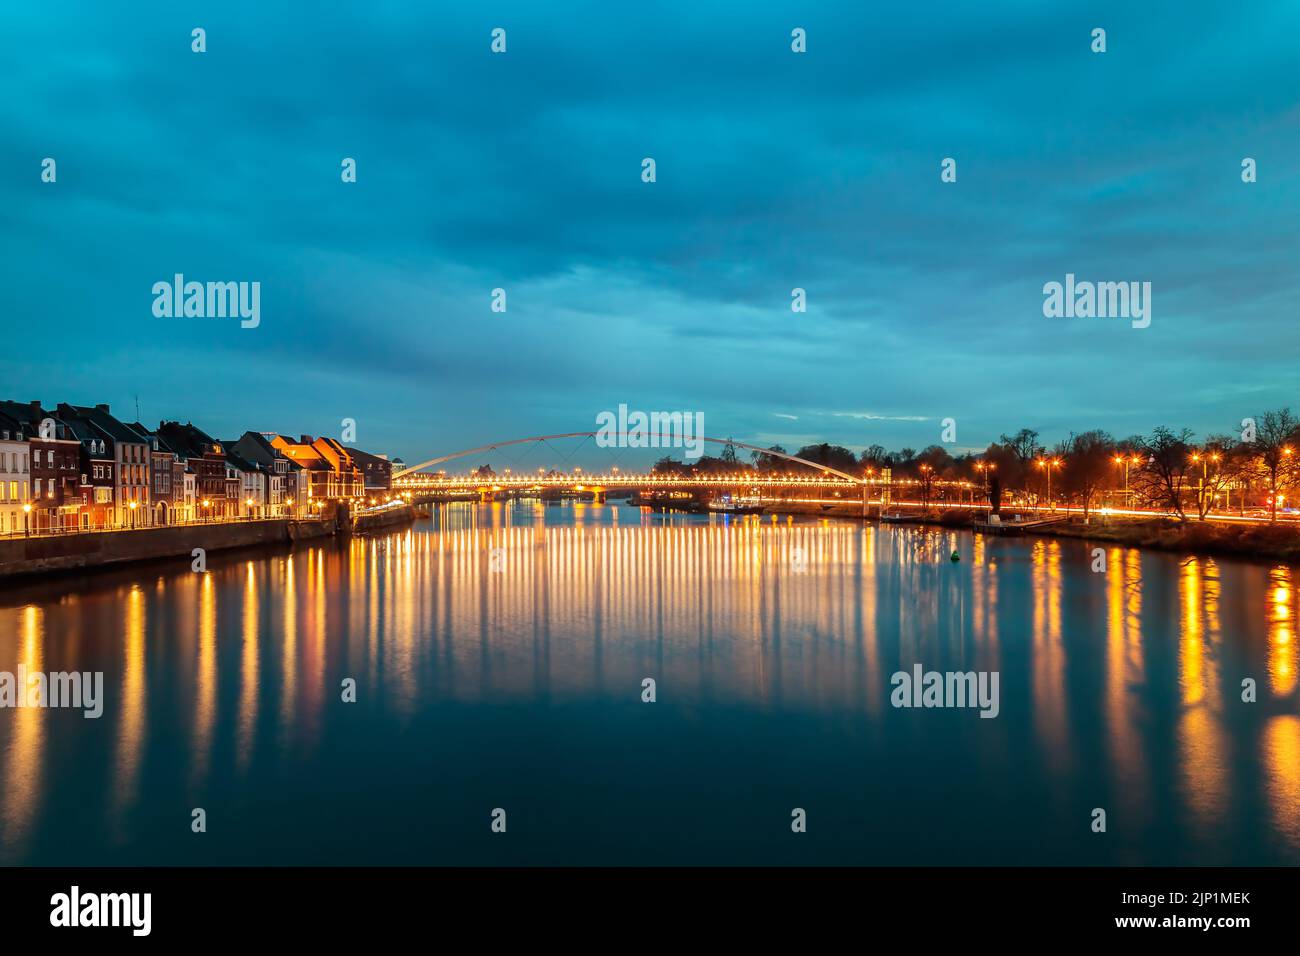 Evening view at the Maas river in the Dutch city of Maastricht with christmas lights reflecting in the water Stock Photo